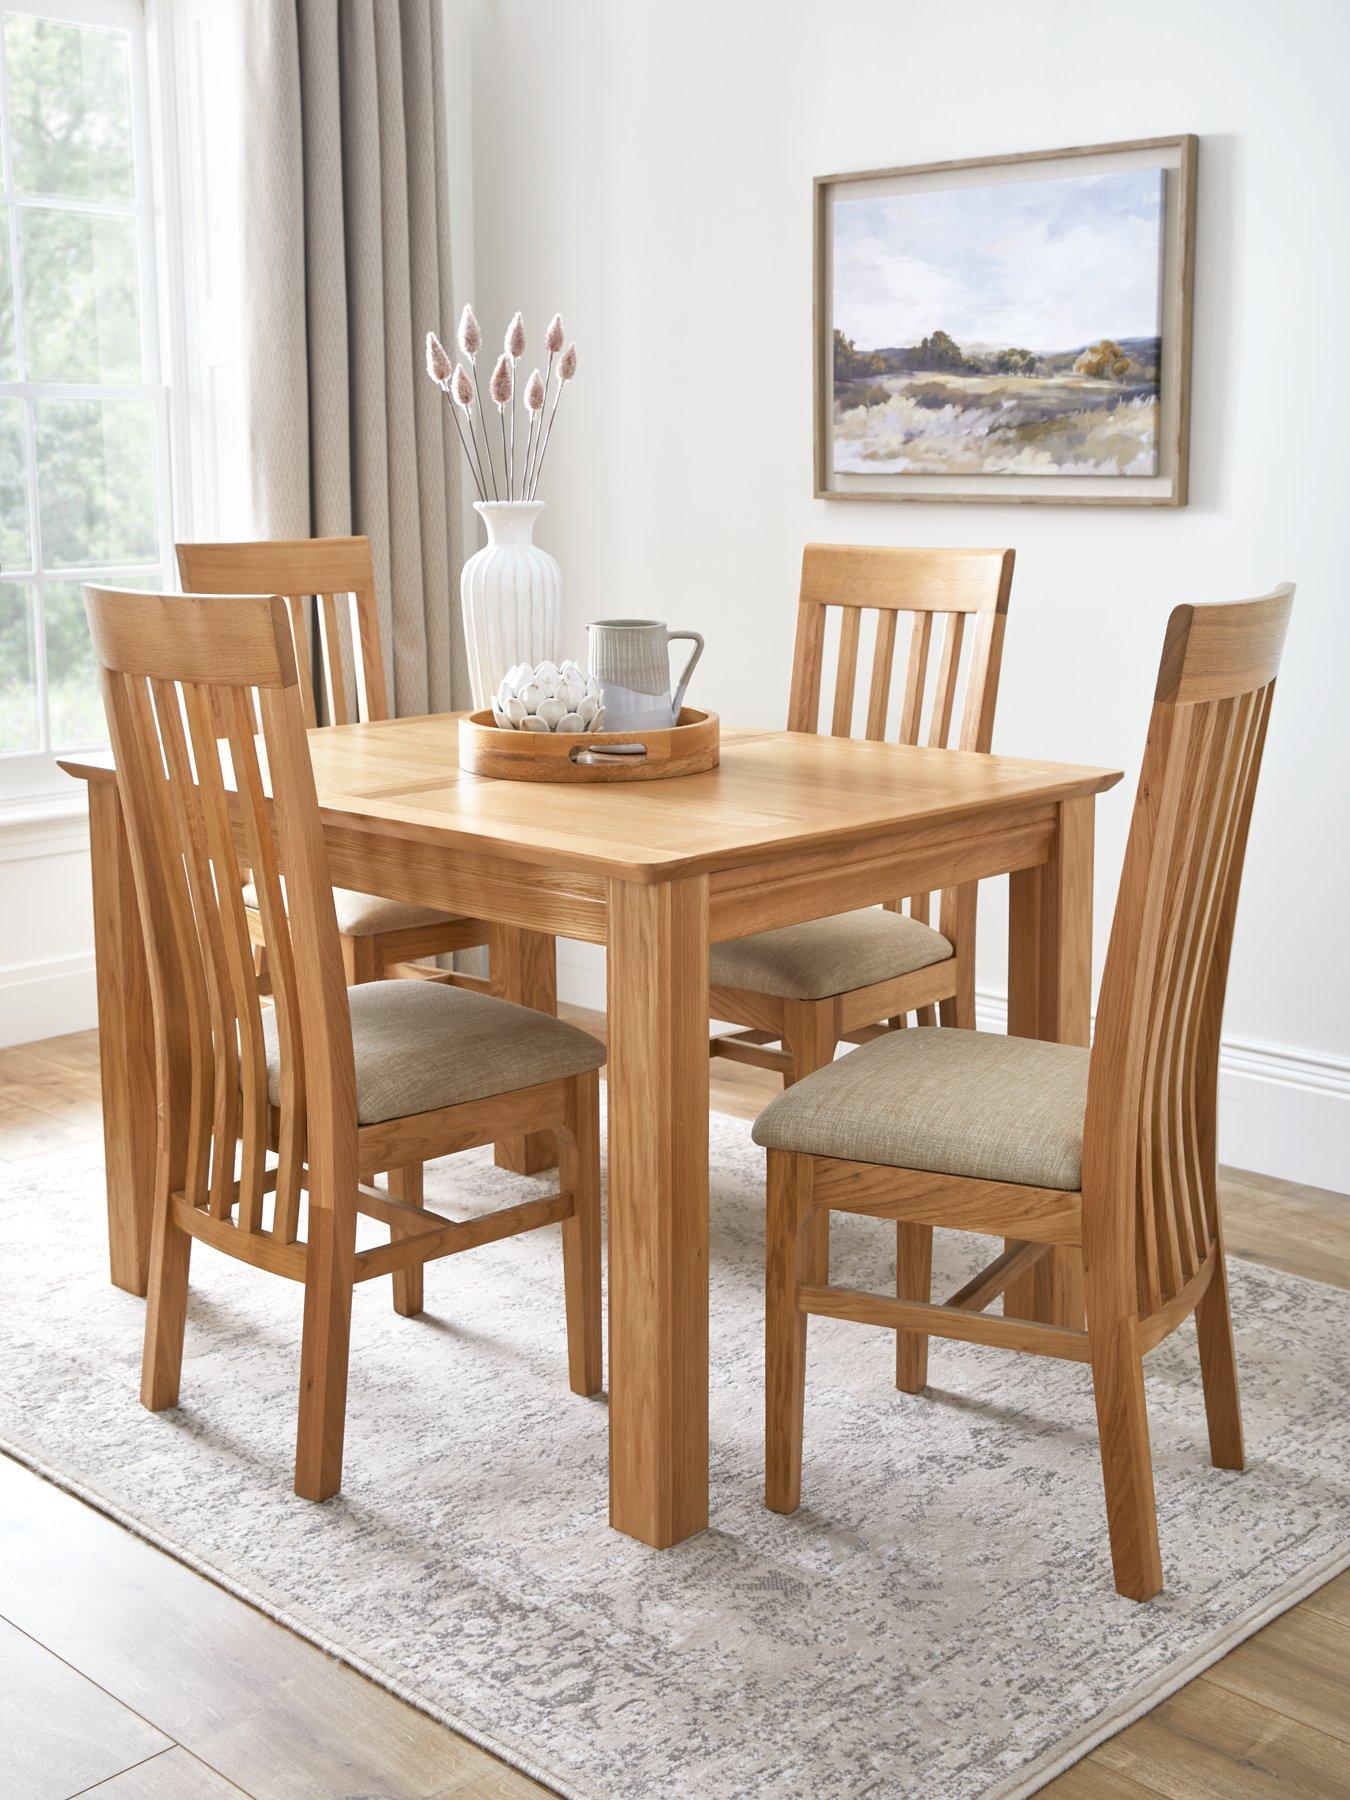 Very Home New Constance Dining Set - Extending Table And 4 Chairs